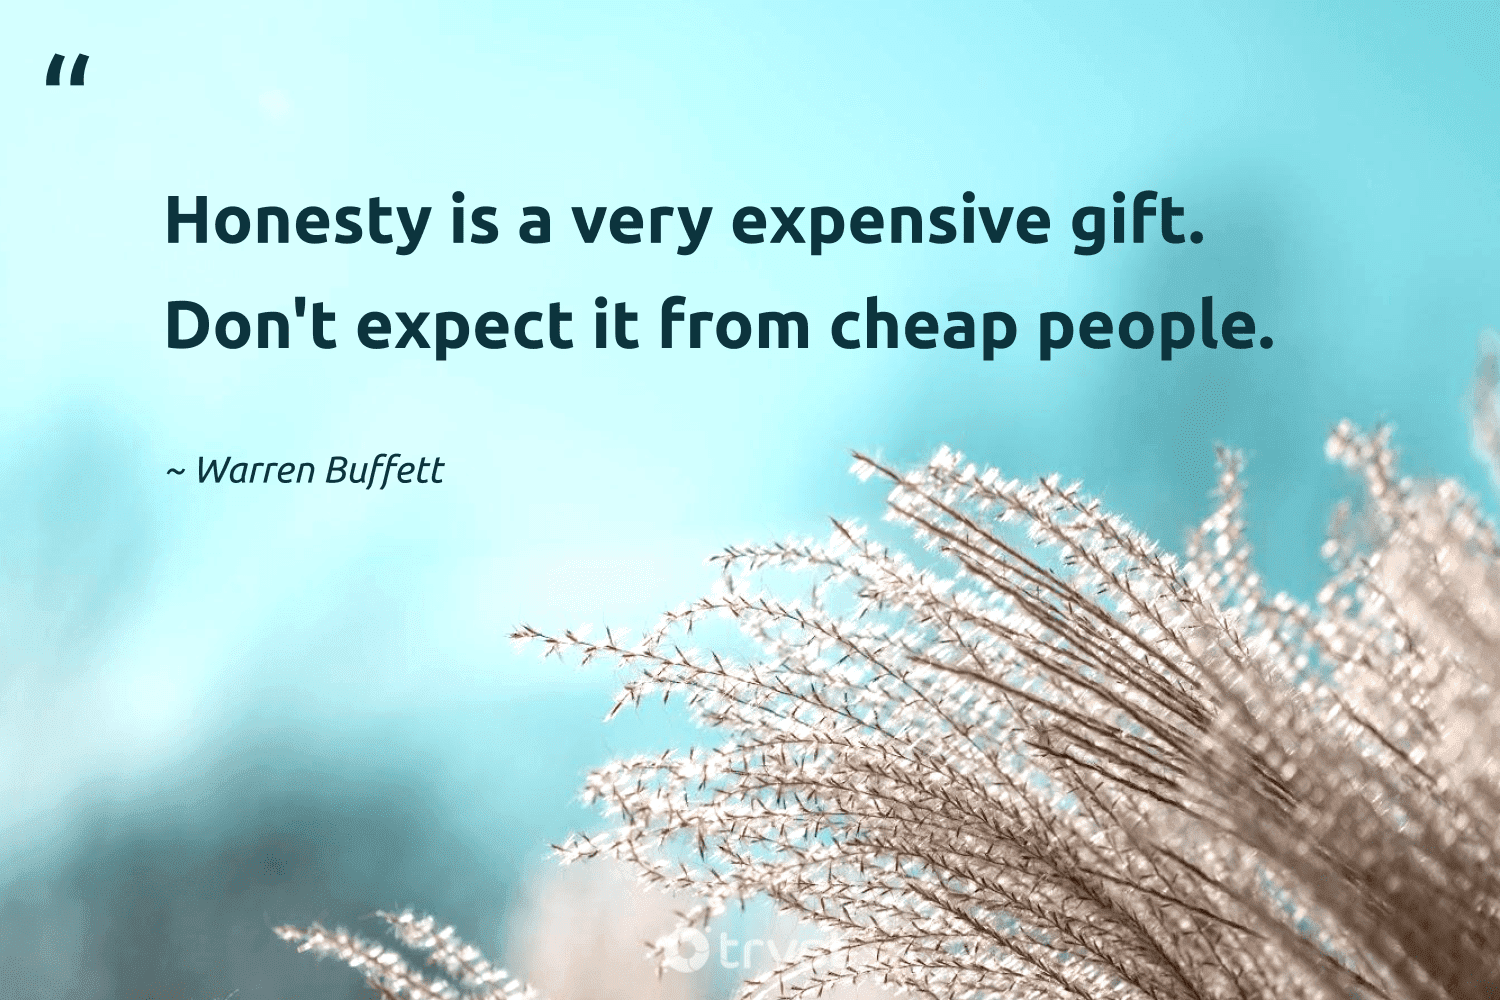 𝐈𝐧𝐬𝐩𝐢𝐫𝐚𝐭𝐢𝐨𝐧𝐚𝐥 𝐐𝐮𝐨𝐭𝐞𝐬 on Twitter Honesty is a very  expensive gift dont expect it from cheap people Quote  httpstcog1JVaehKdv  Twitter